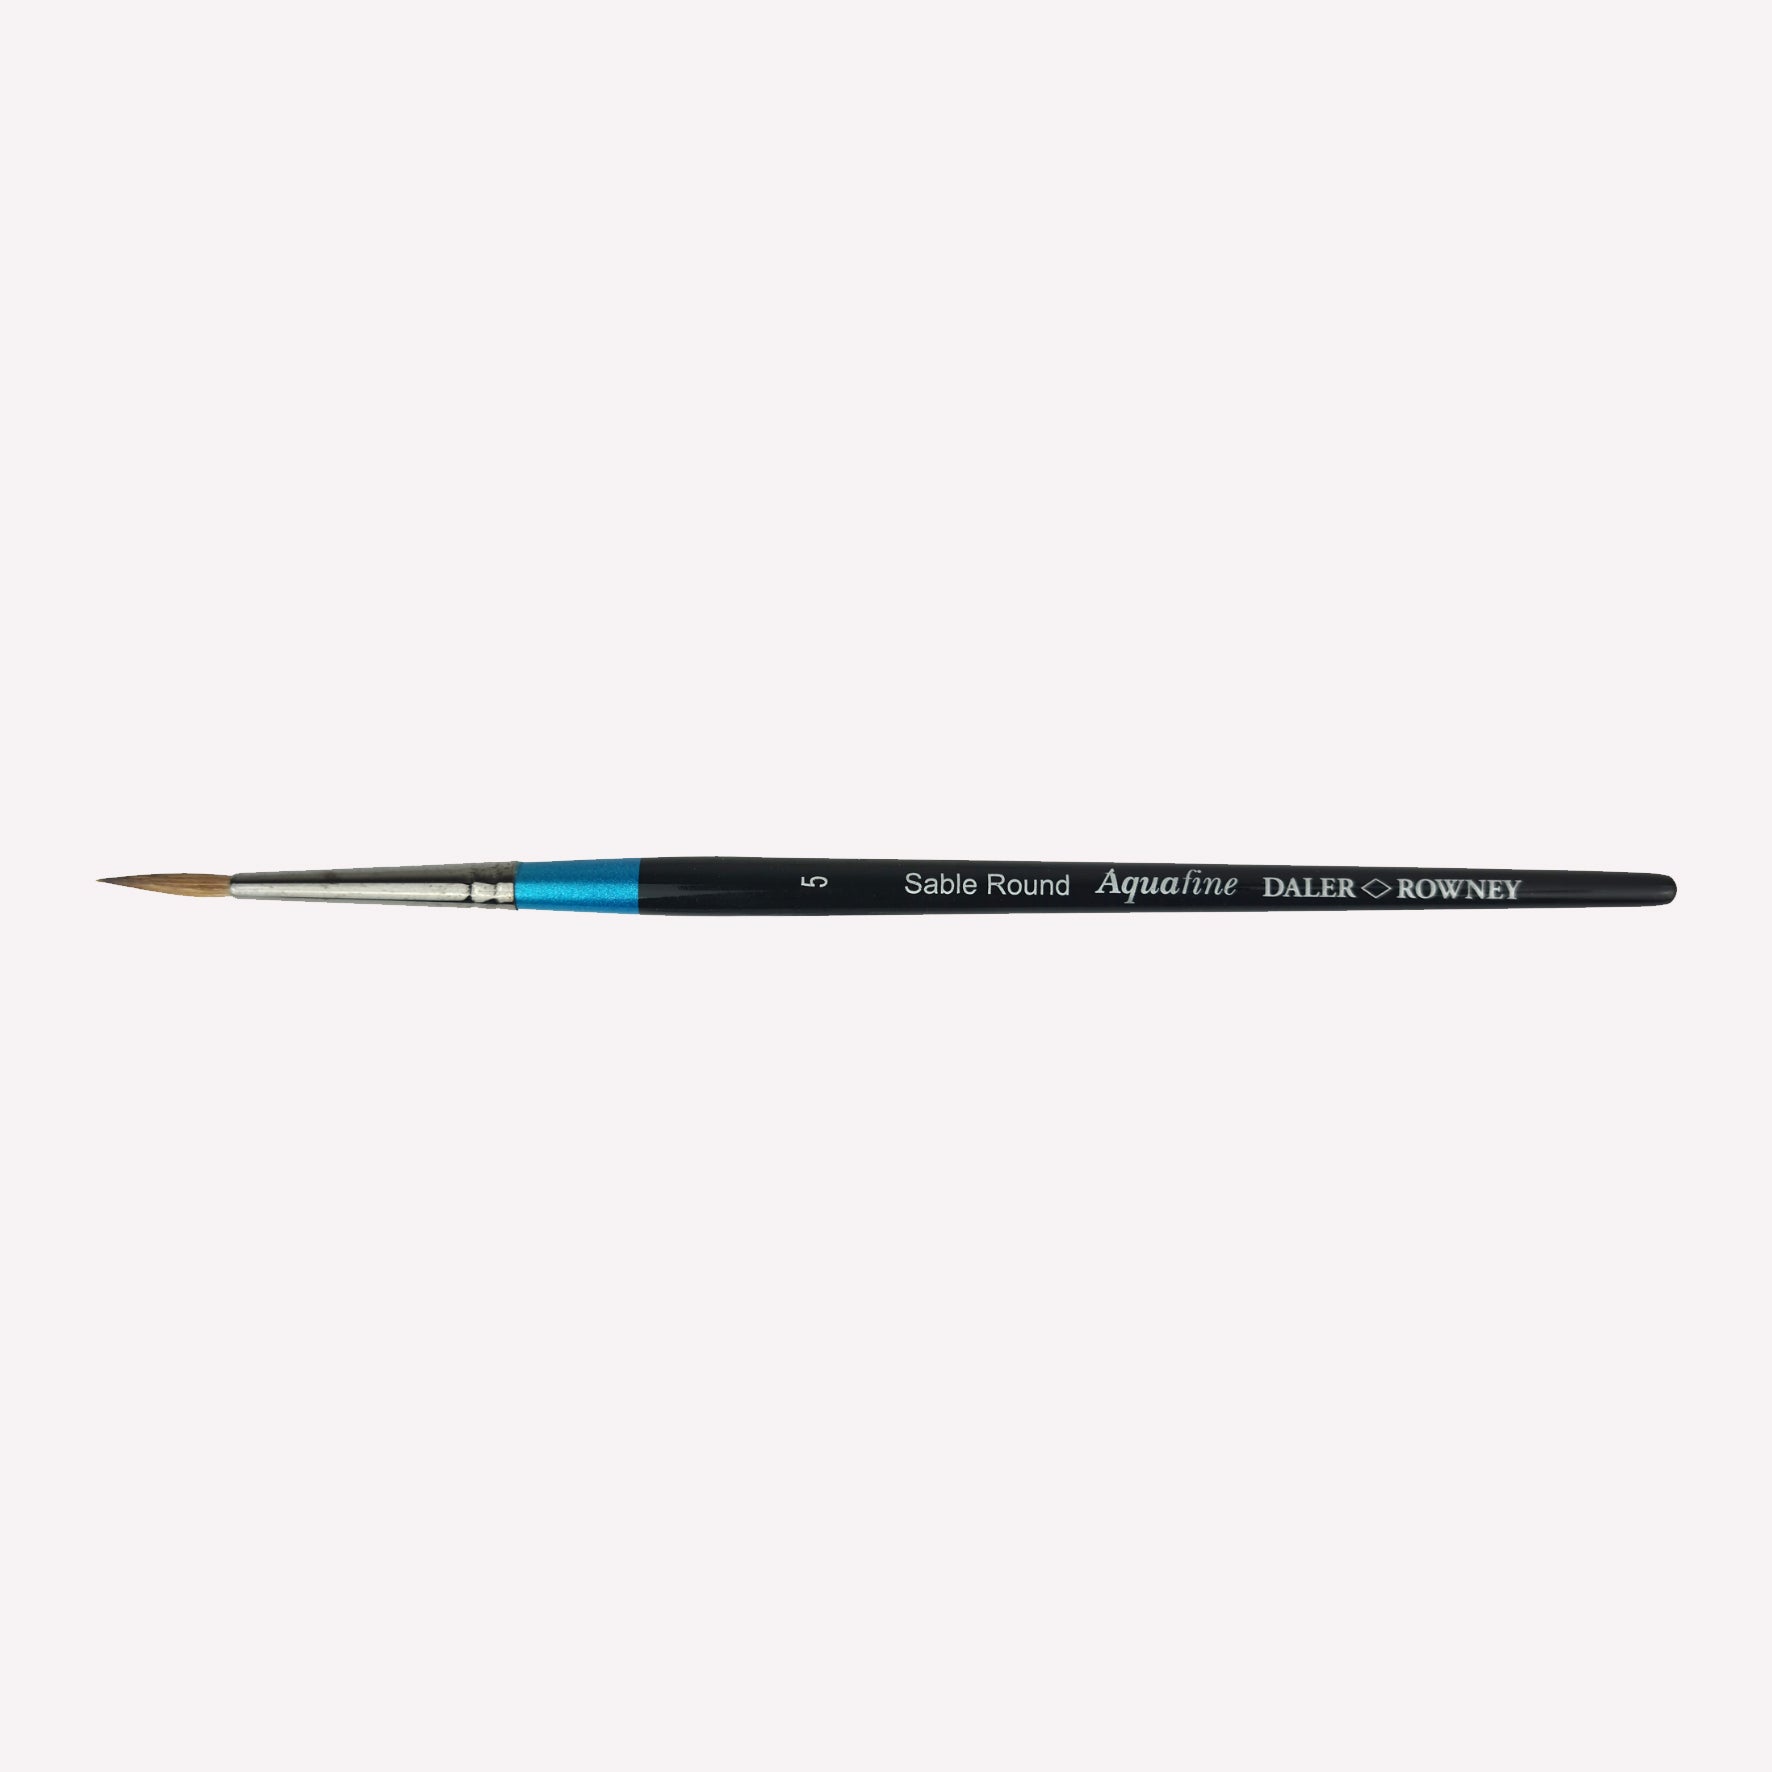 Daler Rowney Aquafine Sable round paintbrush in size 5. The natural filaments come to a fine point, perfect for detailed paintings. Brushes have a classy black handle with blue detailing and a silver ferrule. 